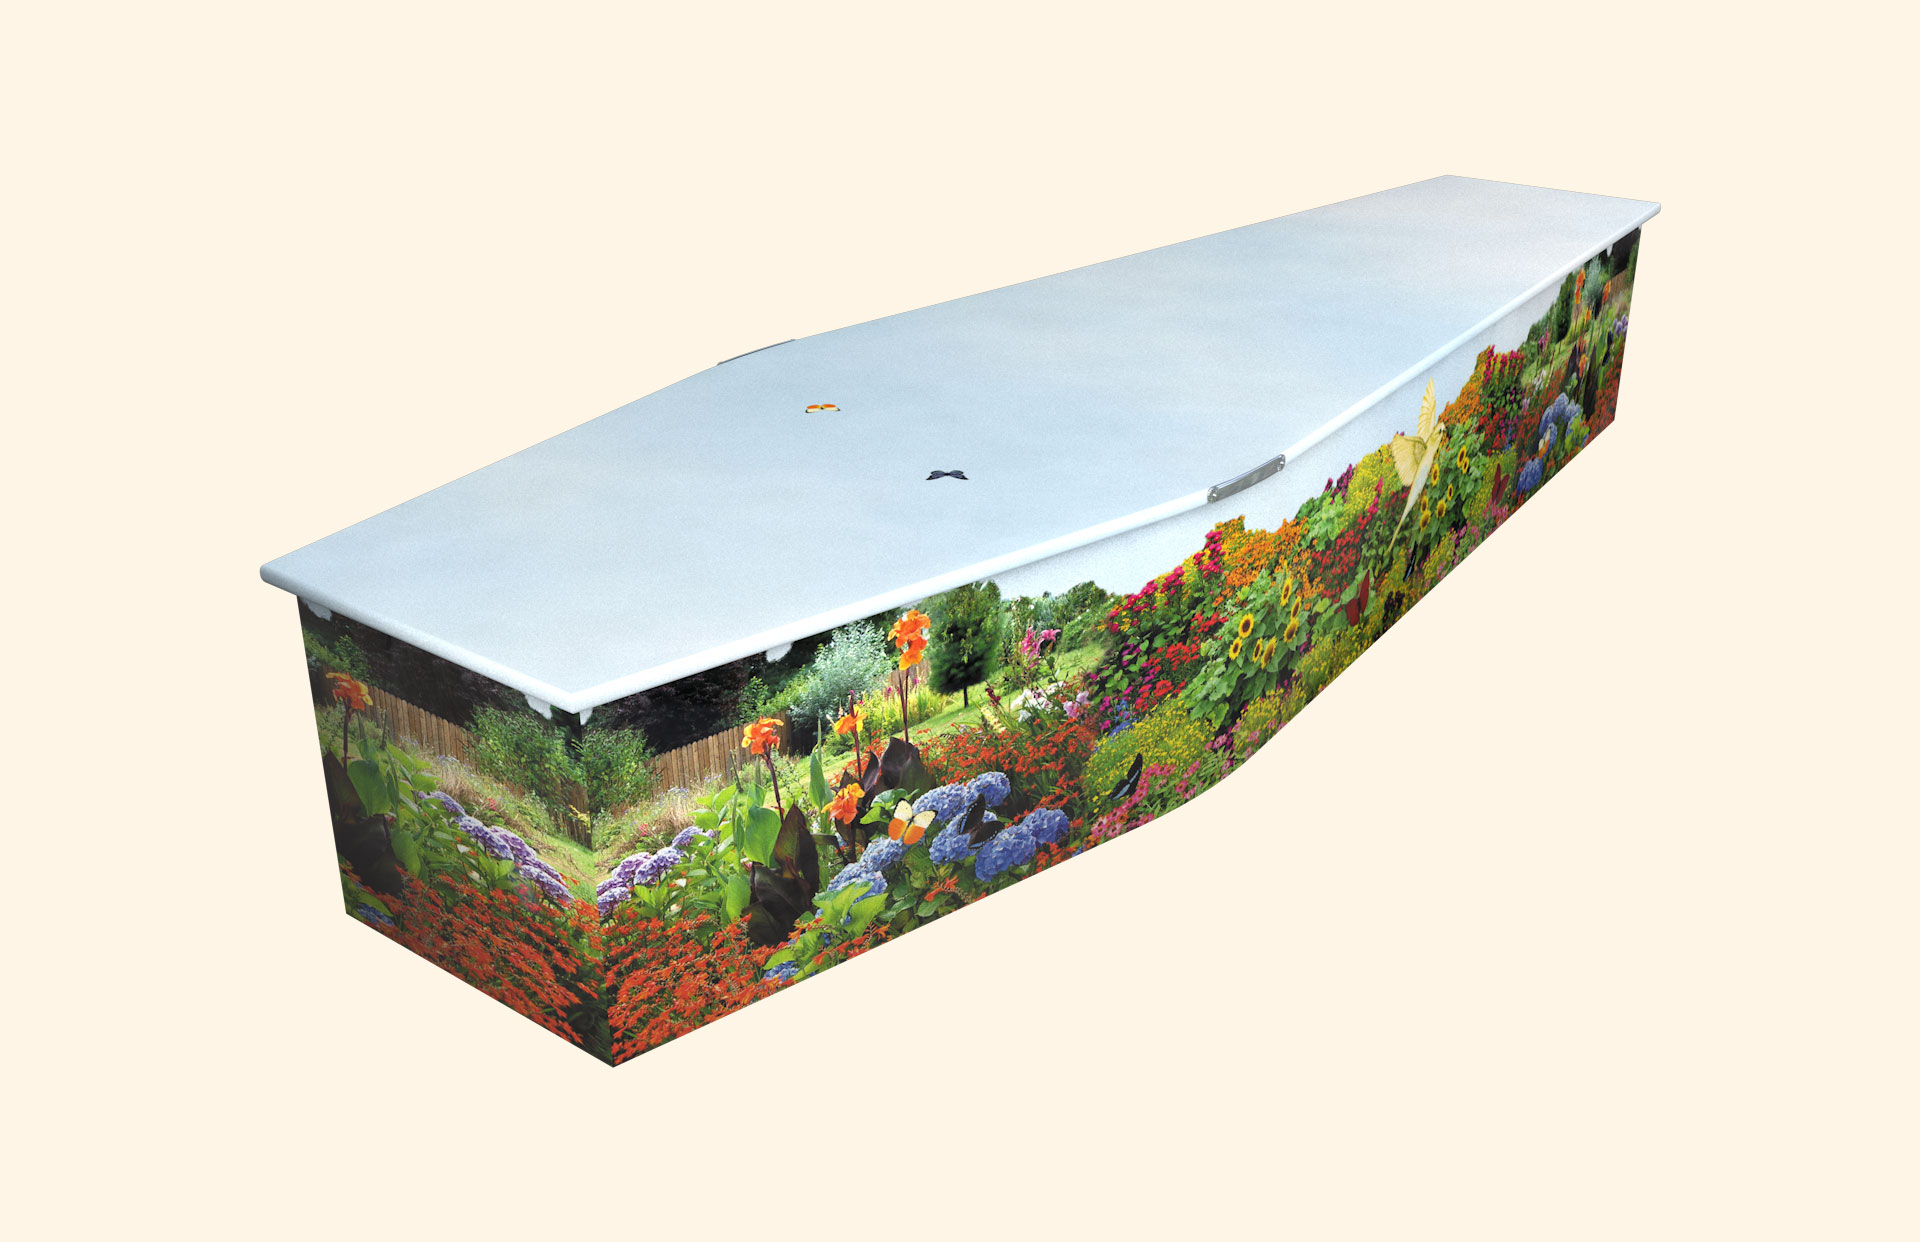 Cottage Garden design on a traditional coffin